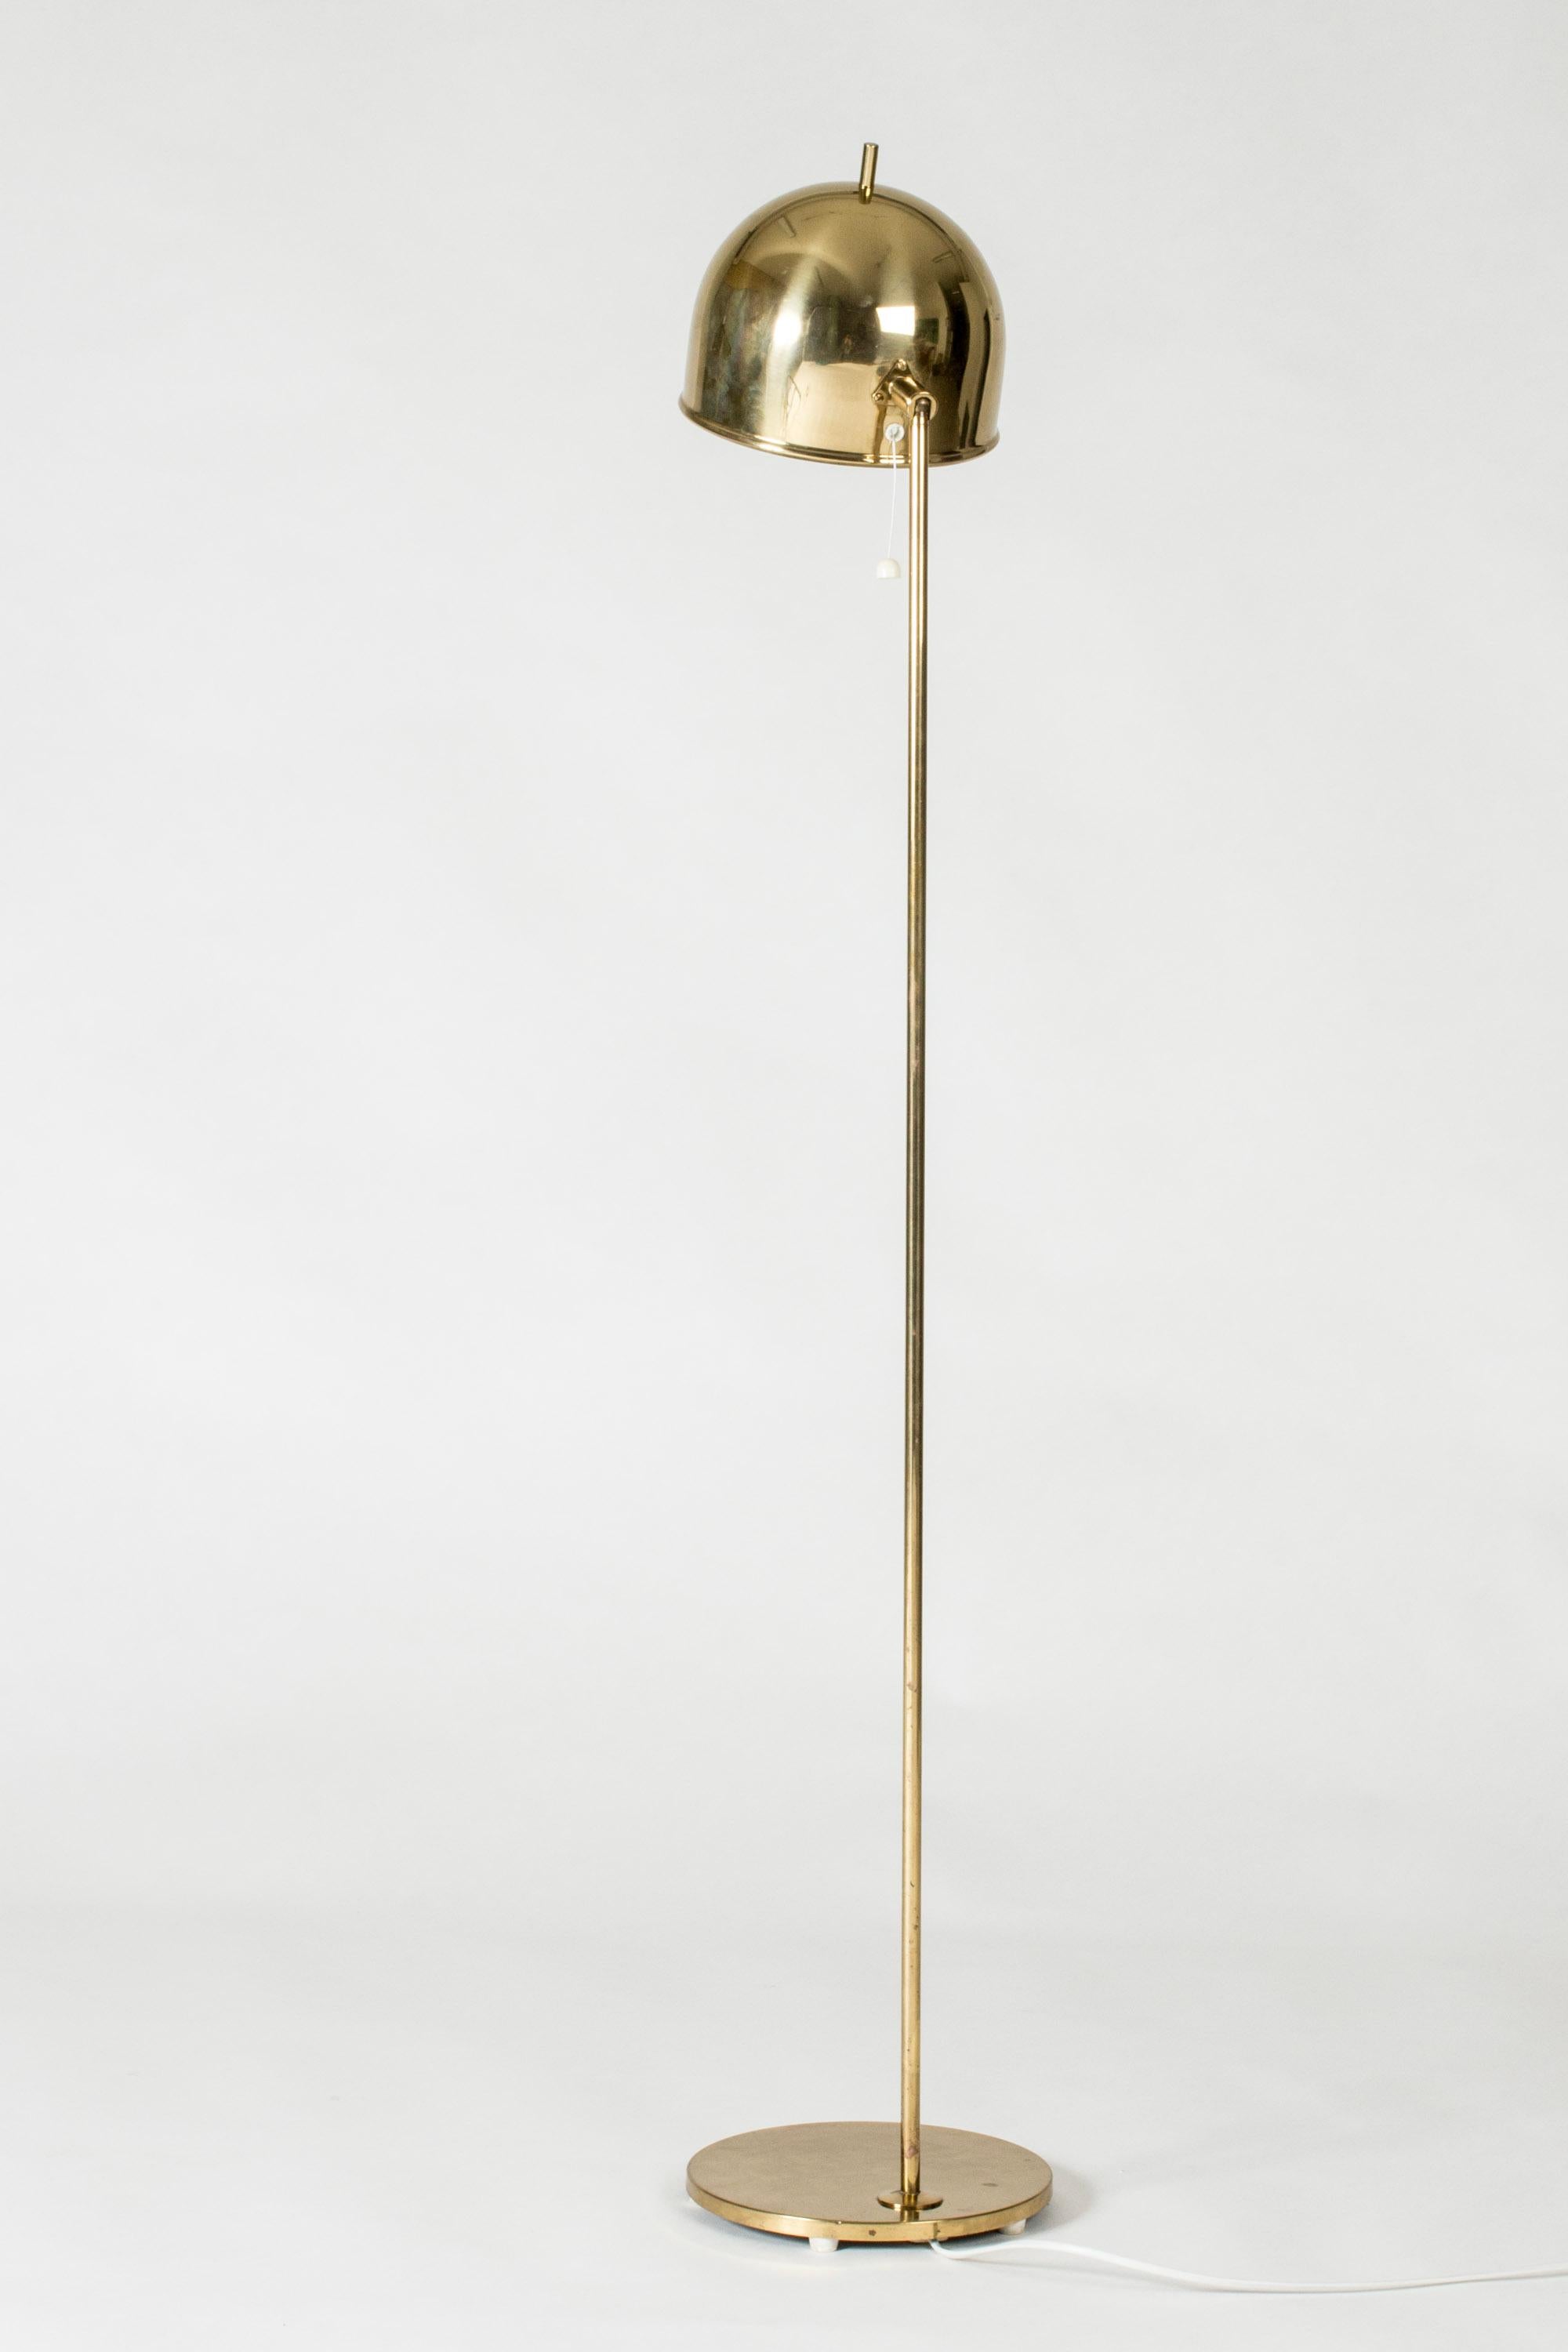 Brass floor lamp from Bergboms, with a sleek, rounded design topped off with a little tip at the top of the lampshade.